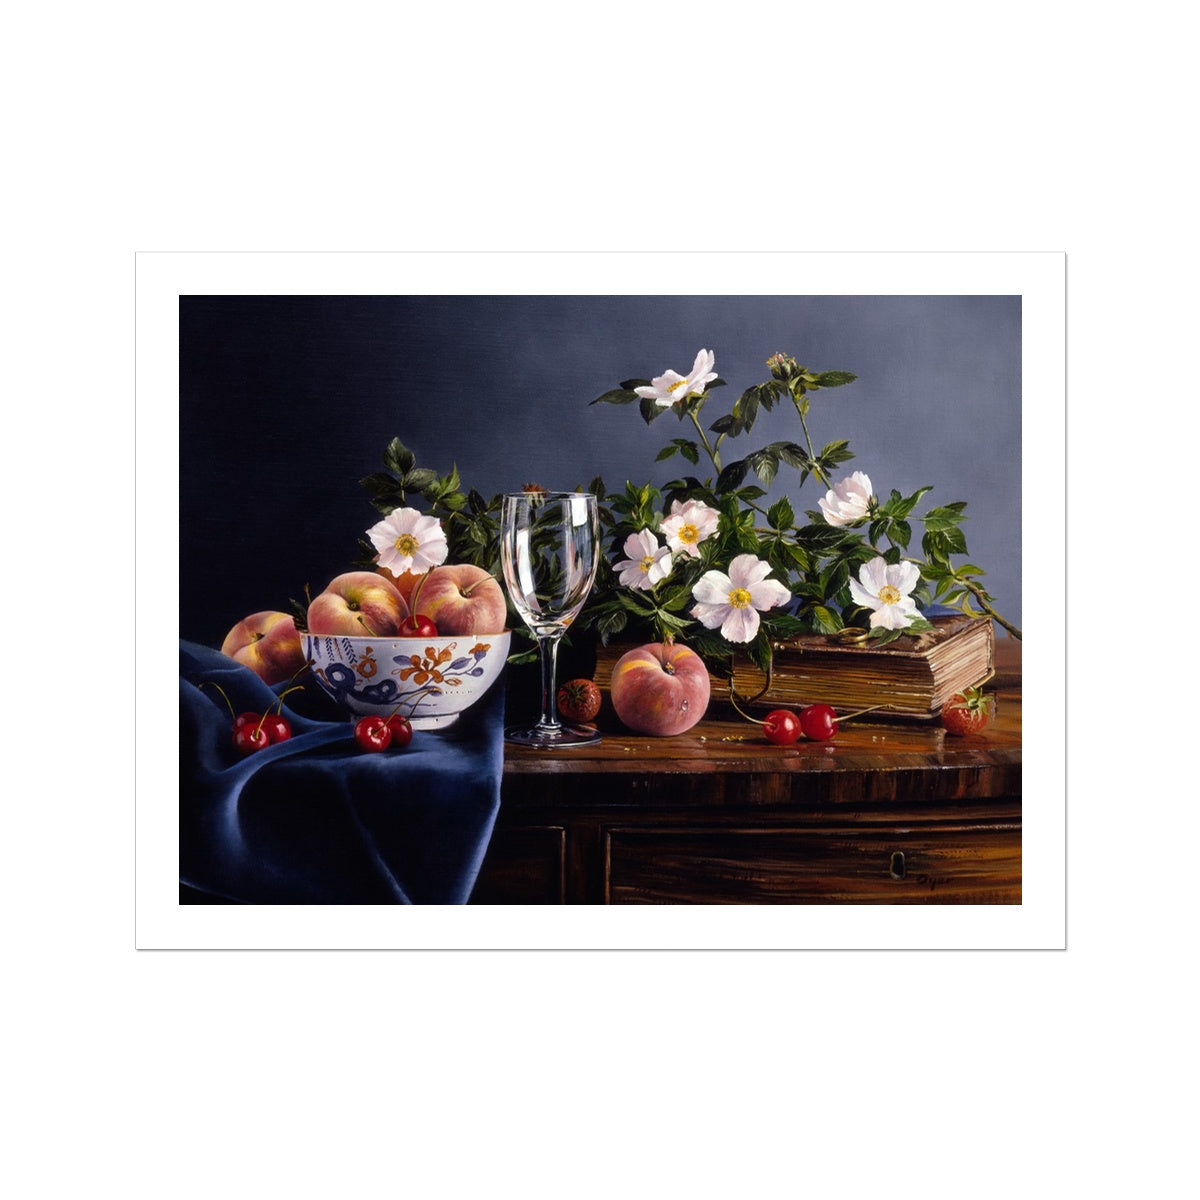 Ted Dyer Fine Art Print. Open Edition Cornish Art Print. 'Peaches and Dog Roses Still Life'. Cornwall Art Gallery